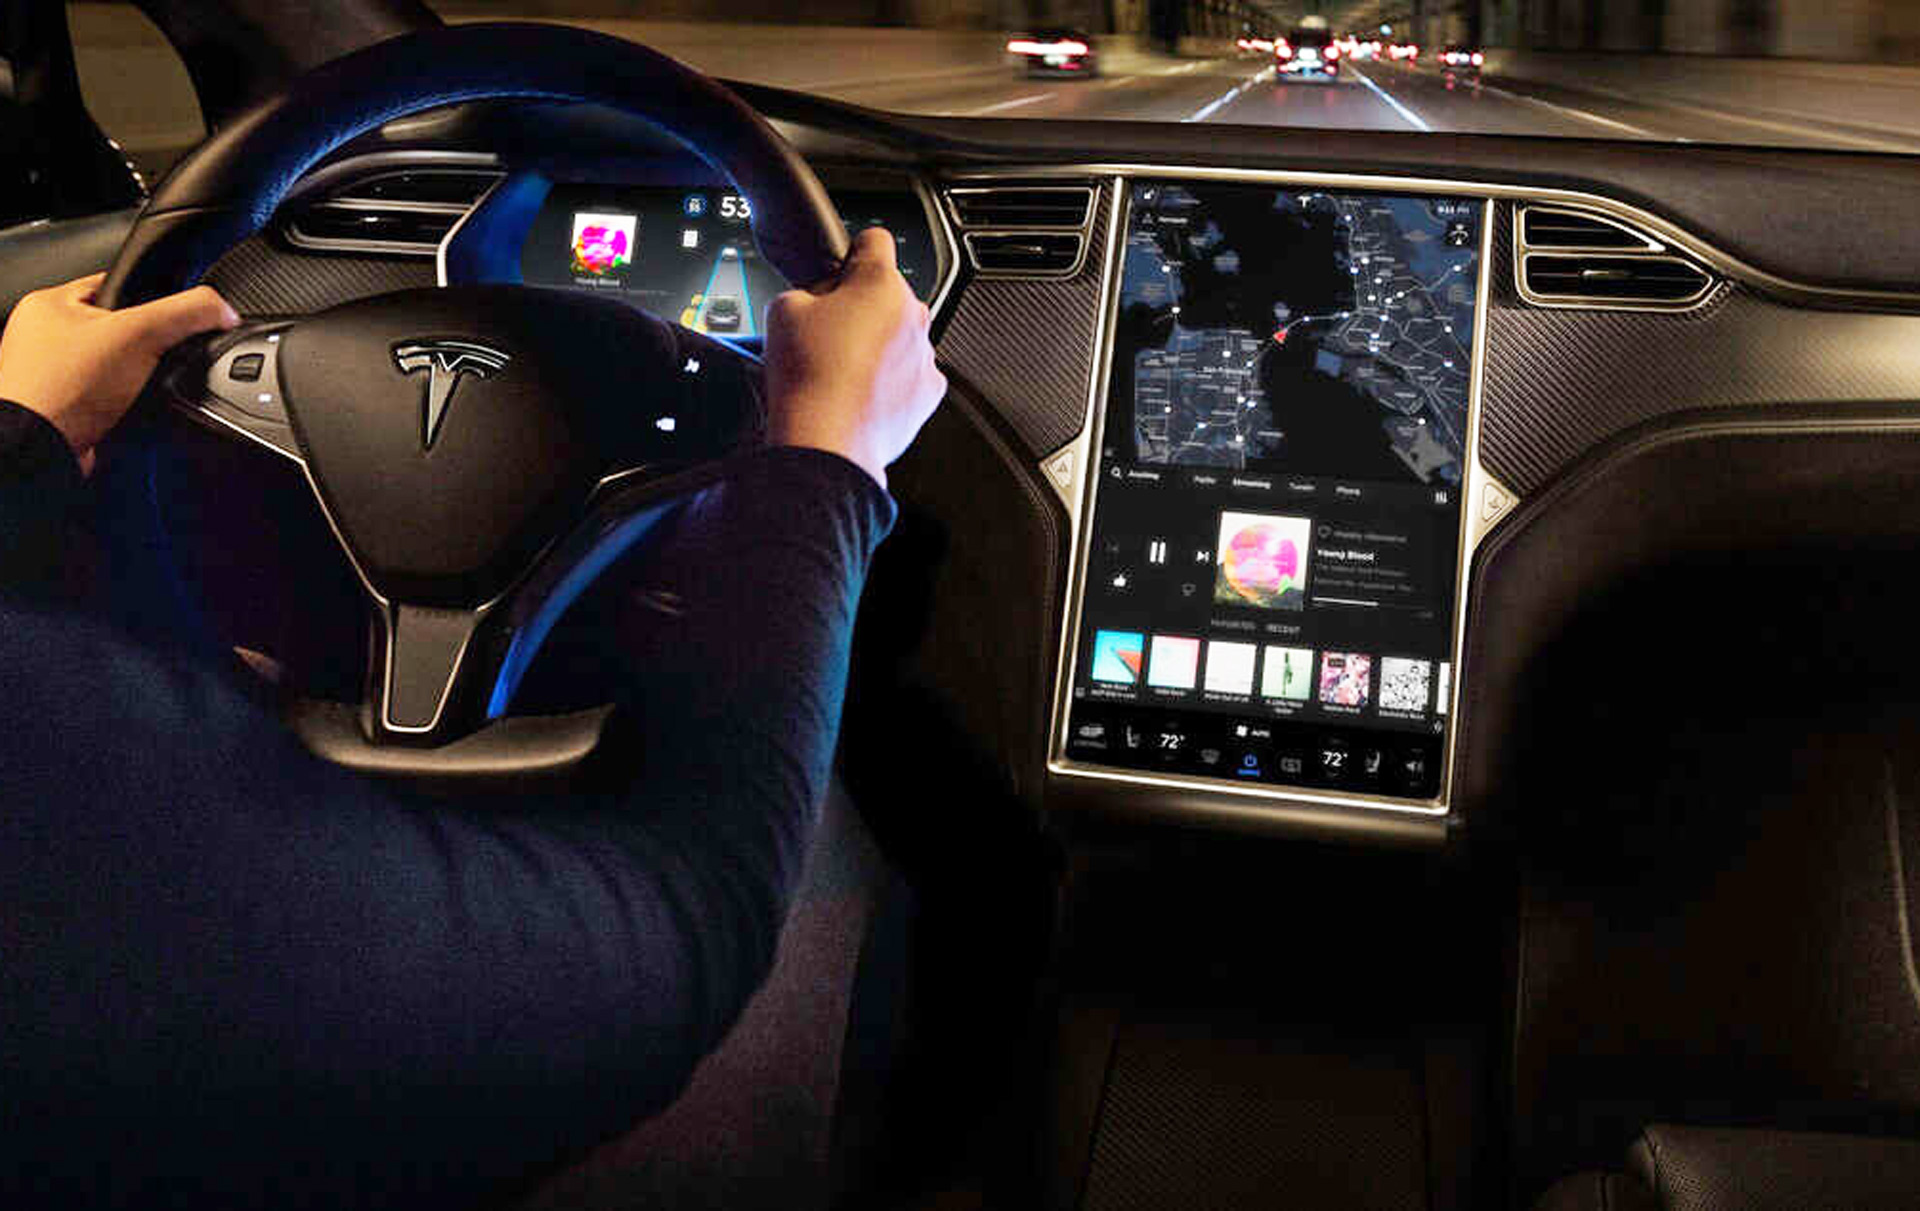 Here’s what’s new with Tesla's 8.0 software update1920 x 1211